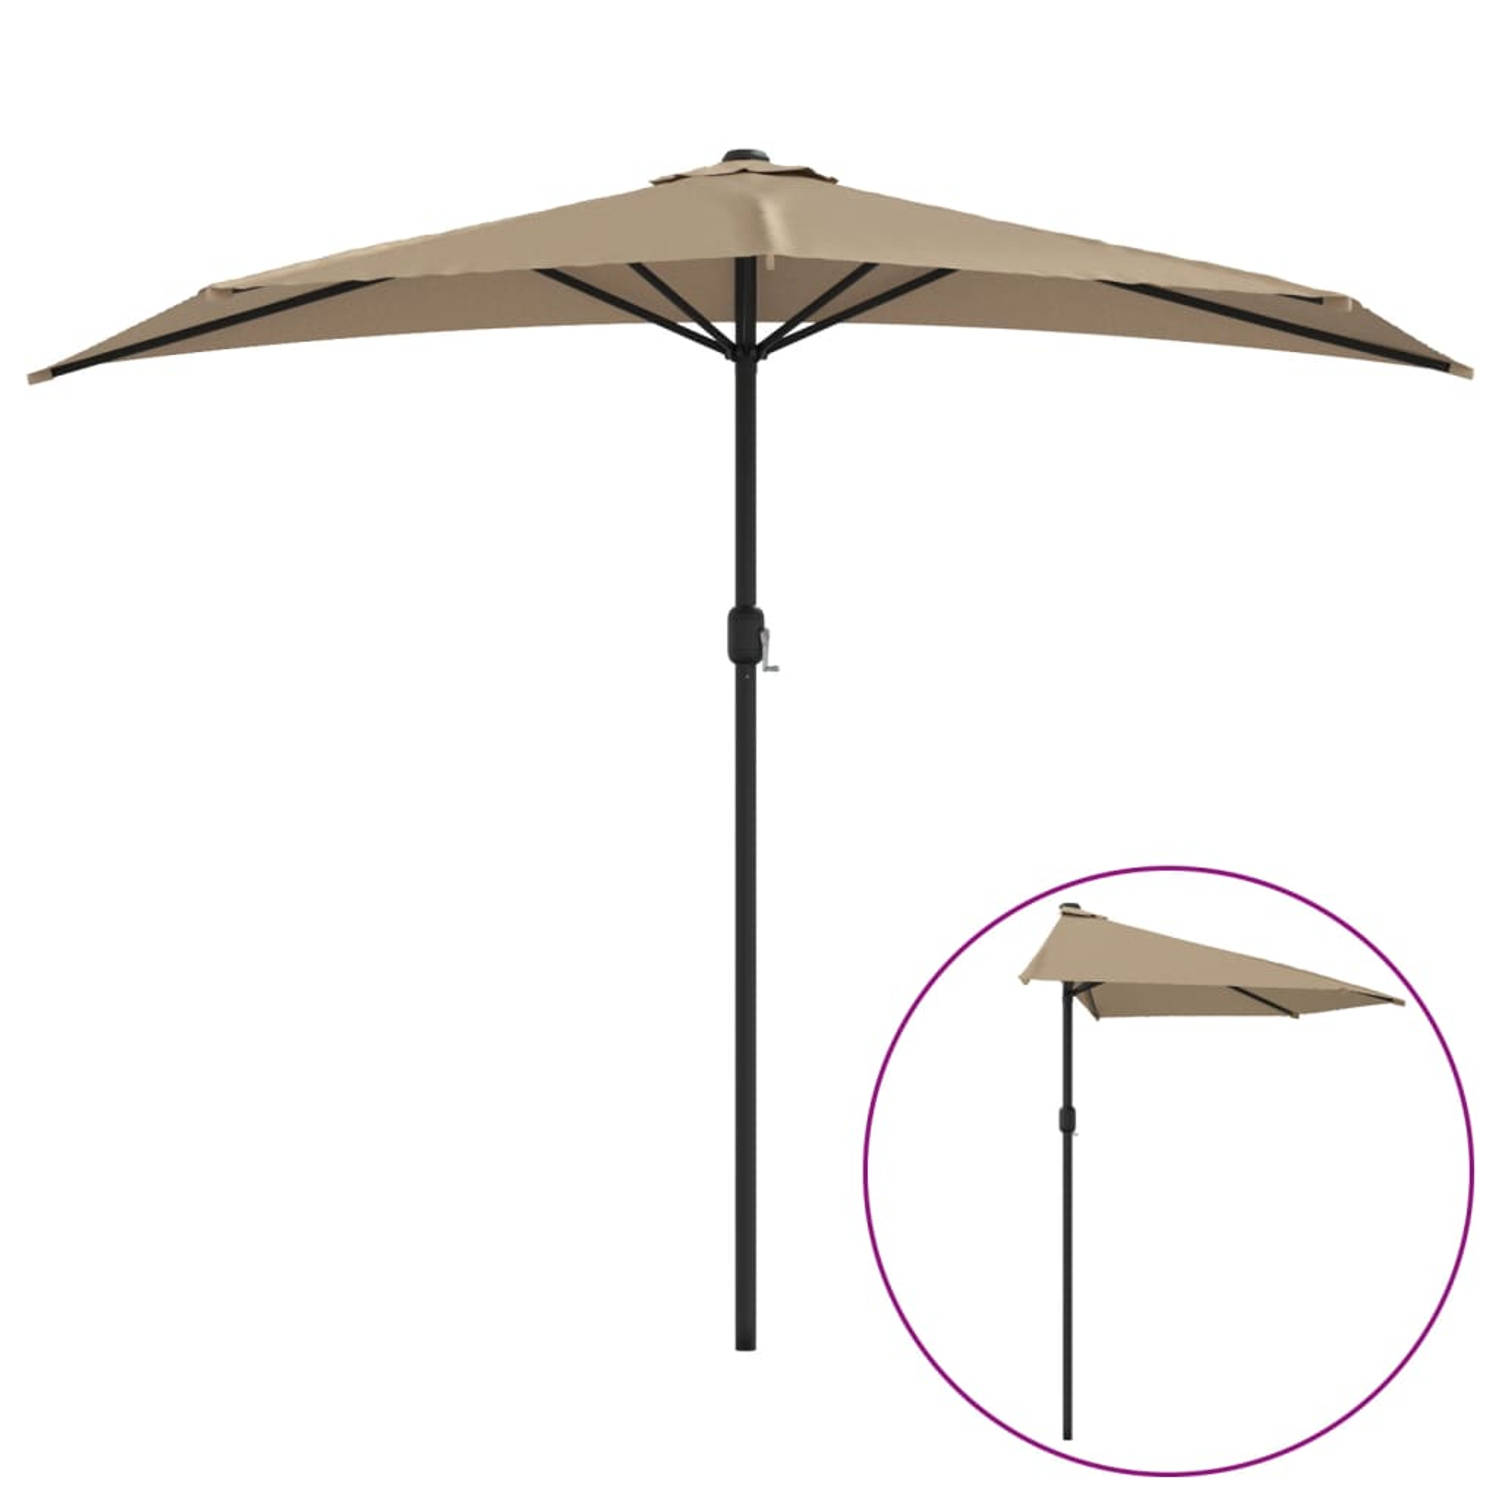 The Living Store tuinparasol - halfrond - 270 x 144 x 222 cm - taupe